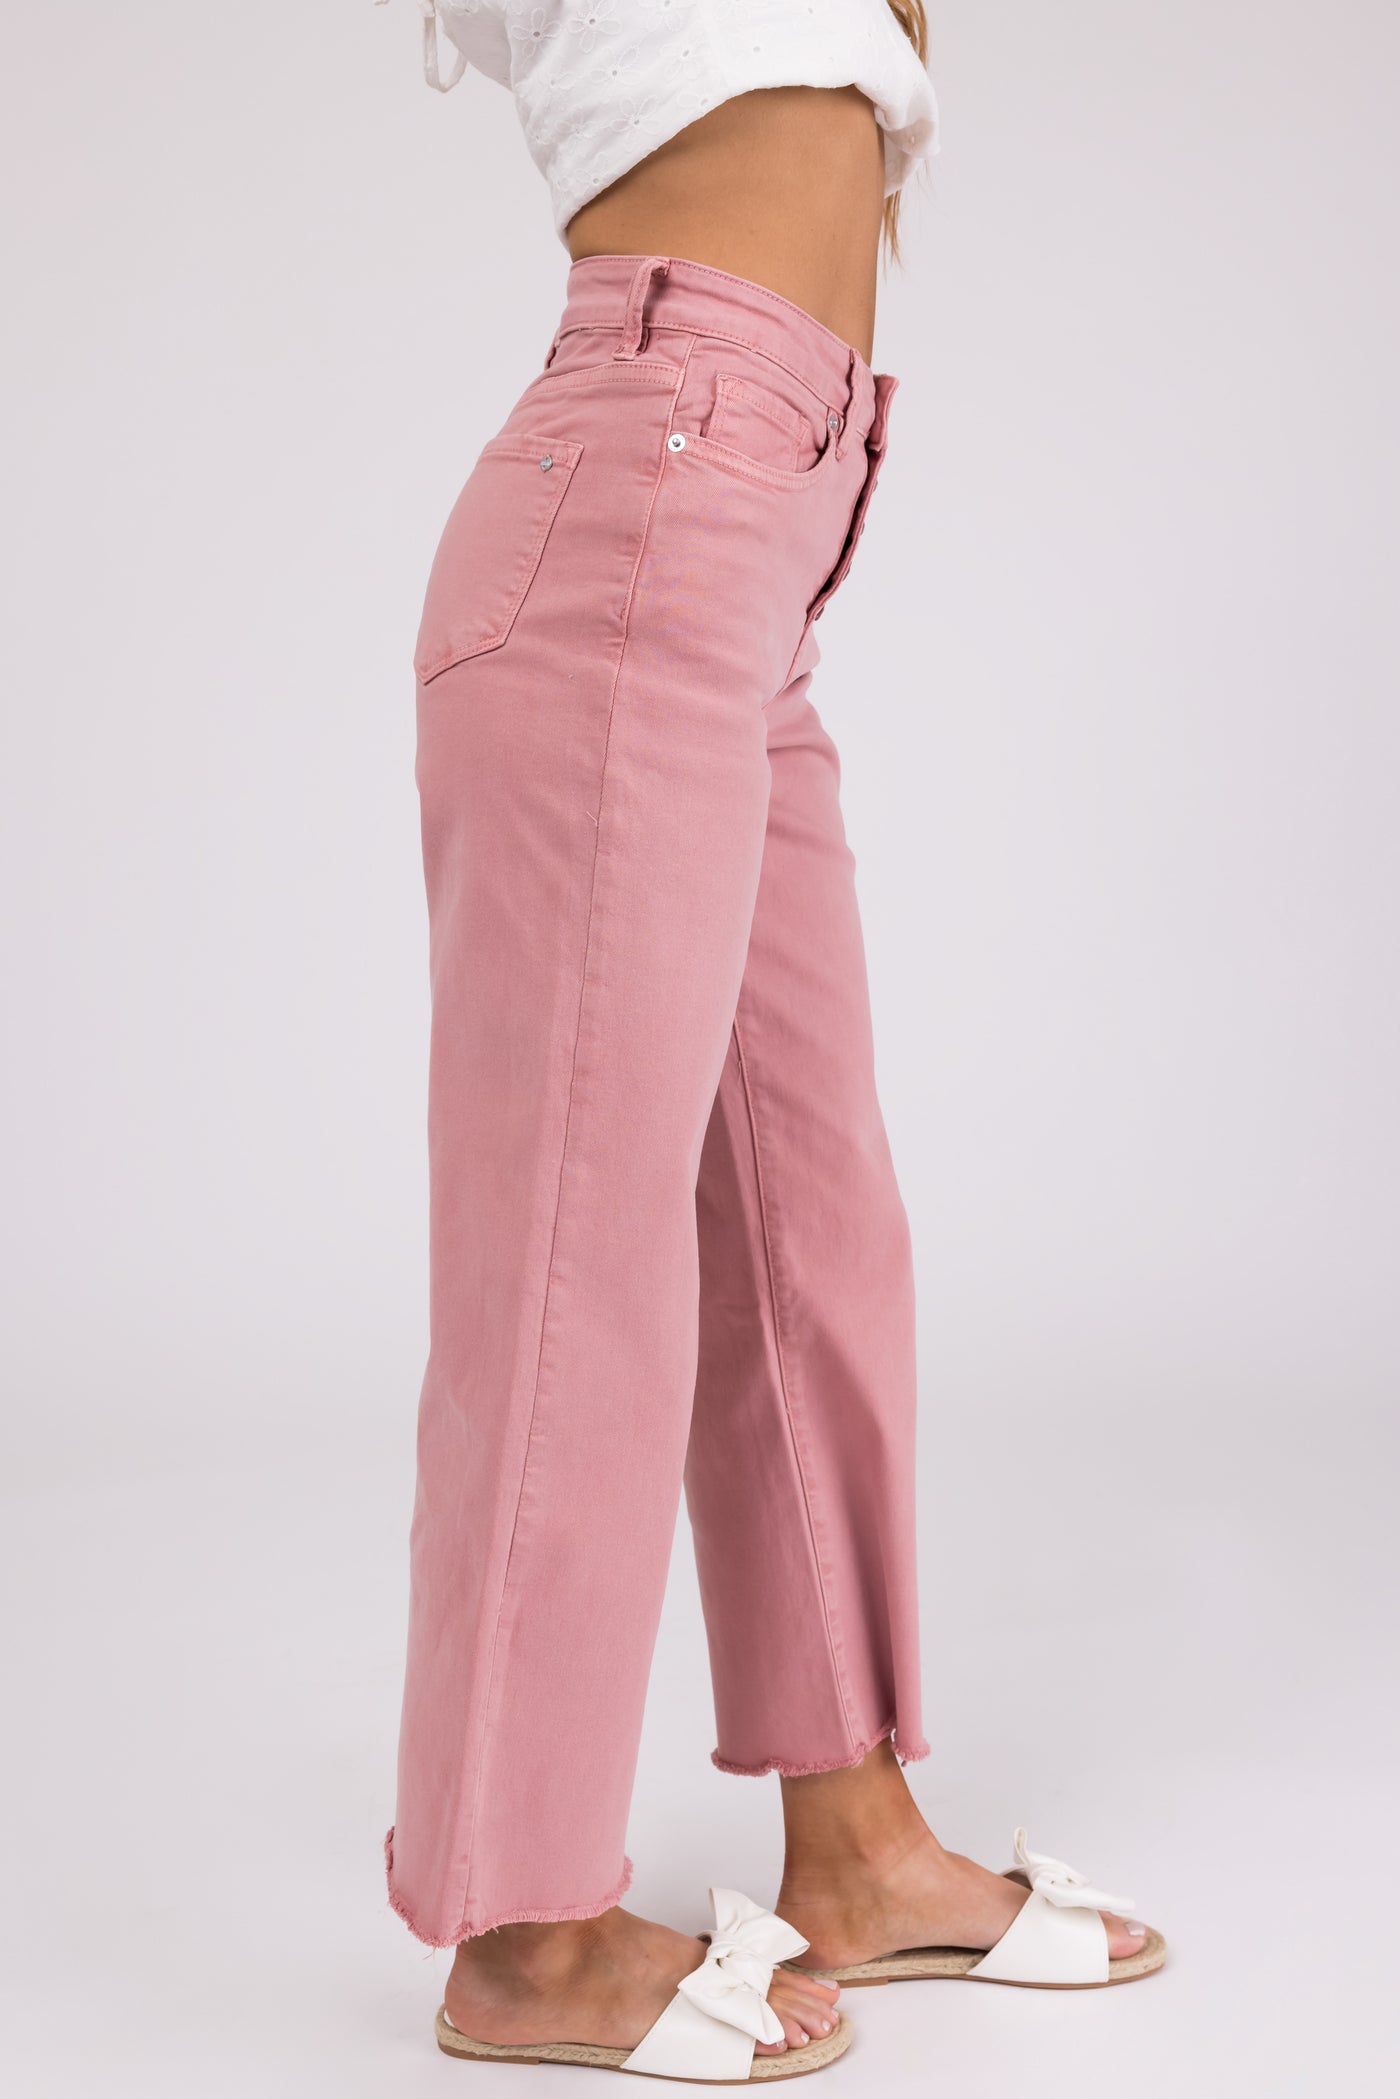 Mica Denim Baby Pink Wide Leg Button Fly Jeans